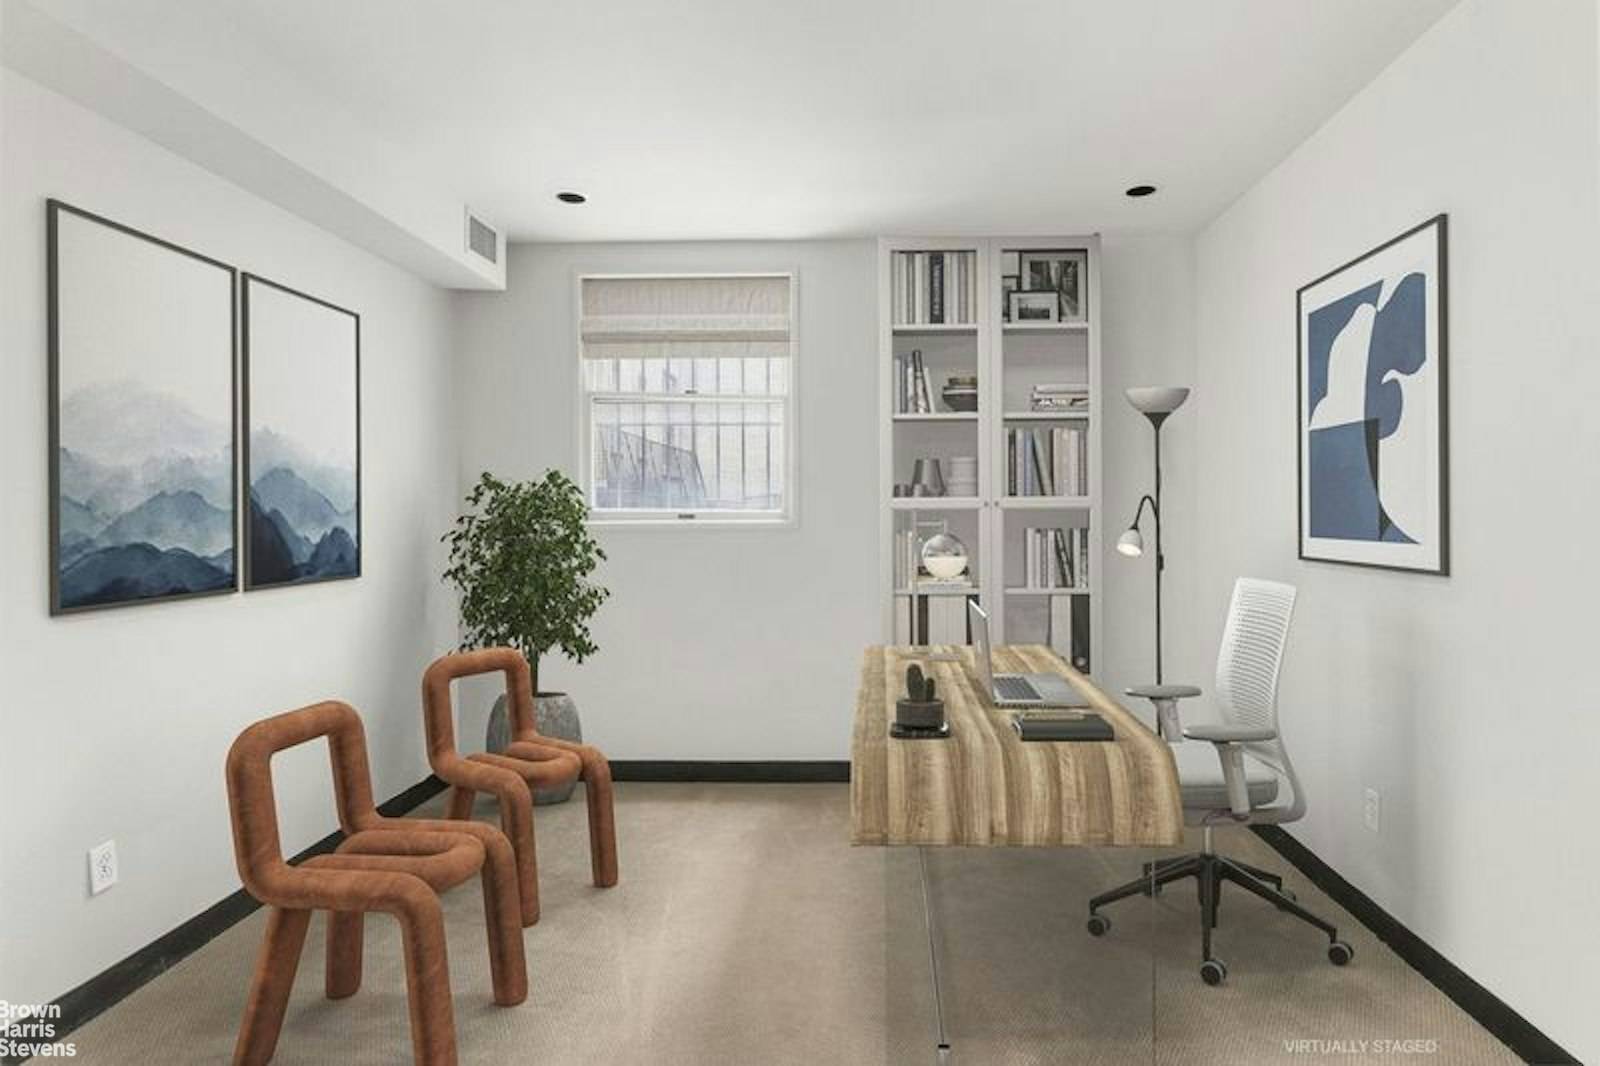 Condo Medical Office Just Off Central Park West in Coveted Lincoln SquareTreasured opportunity to expand establish your practice in one of Manhattan's most desirable neighborhoods.